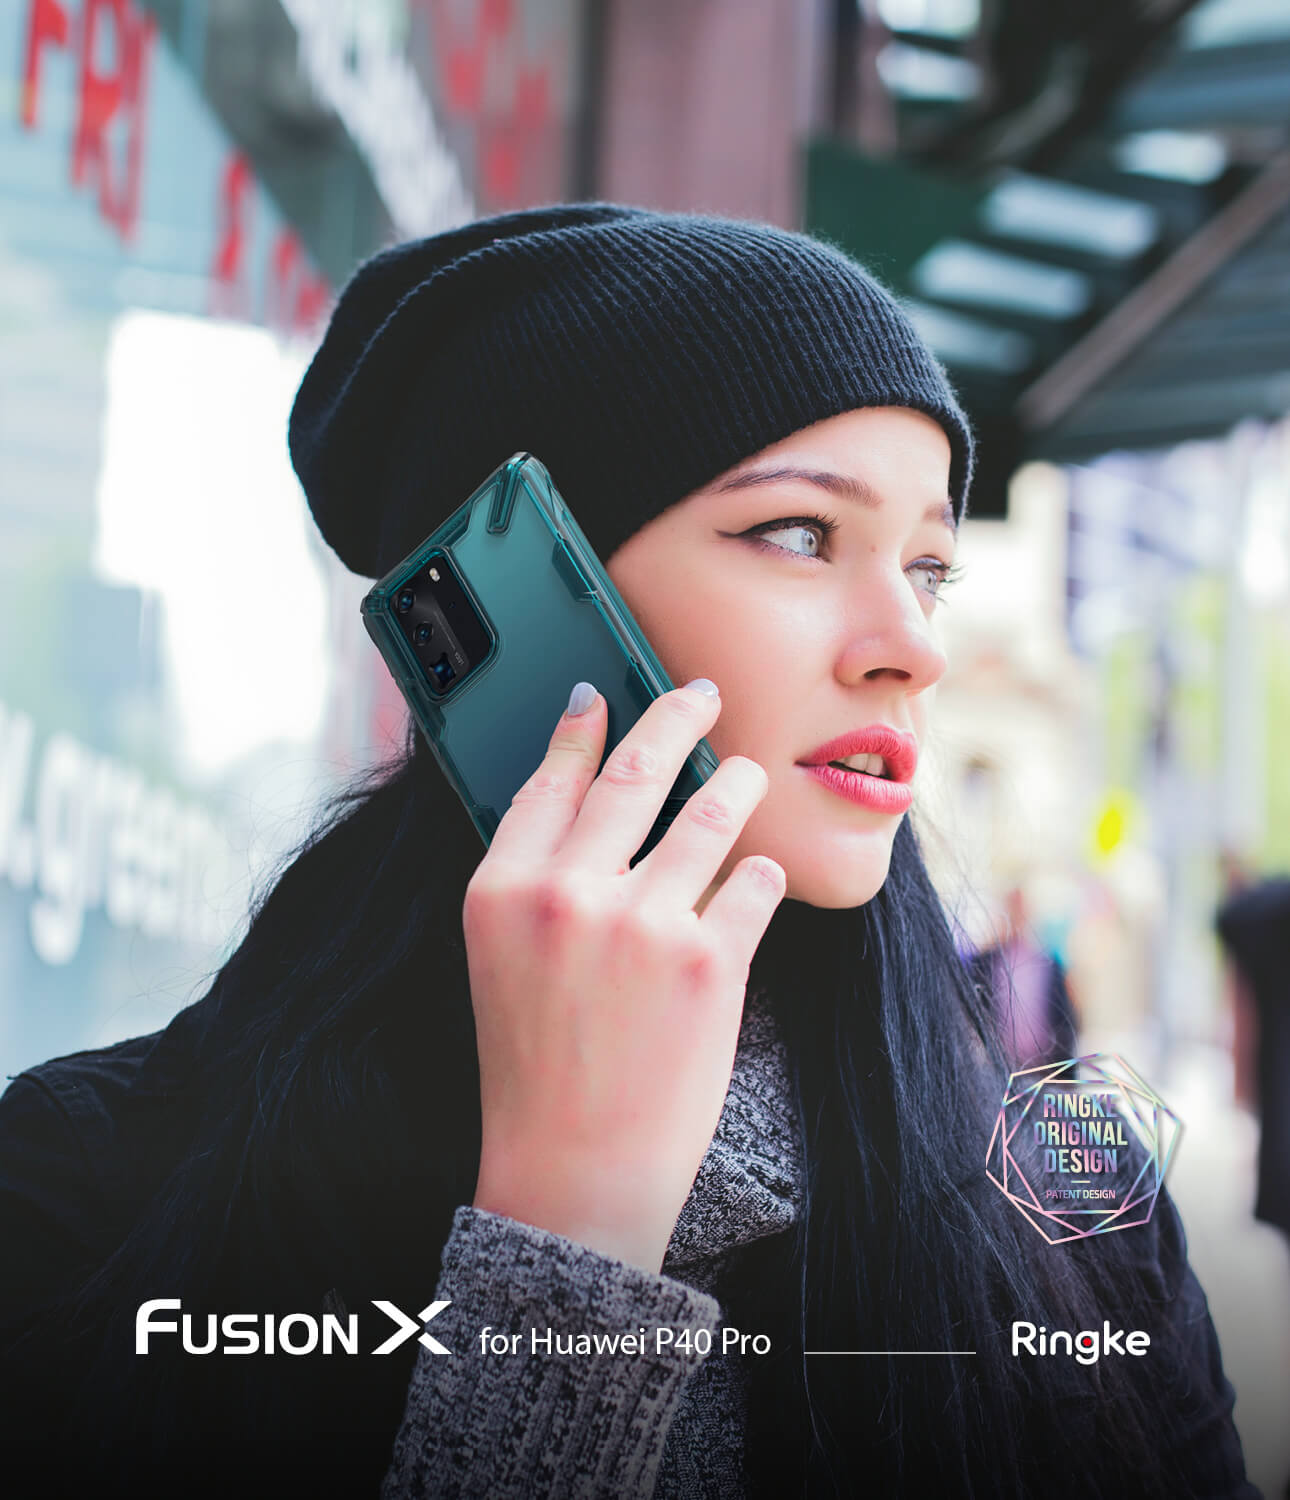 FusionX case for Huawei P40 Pro